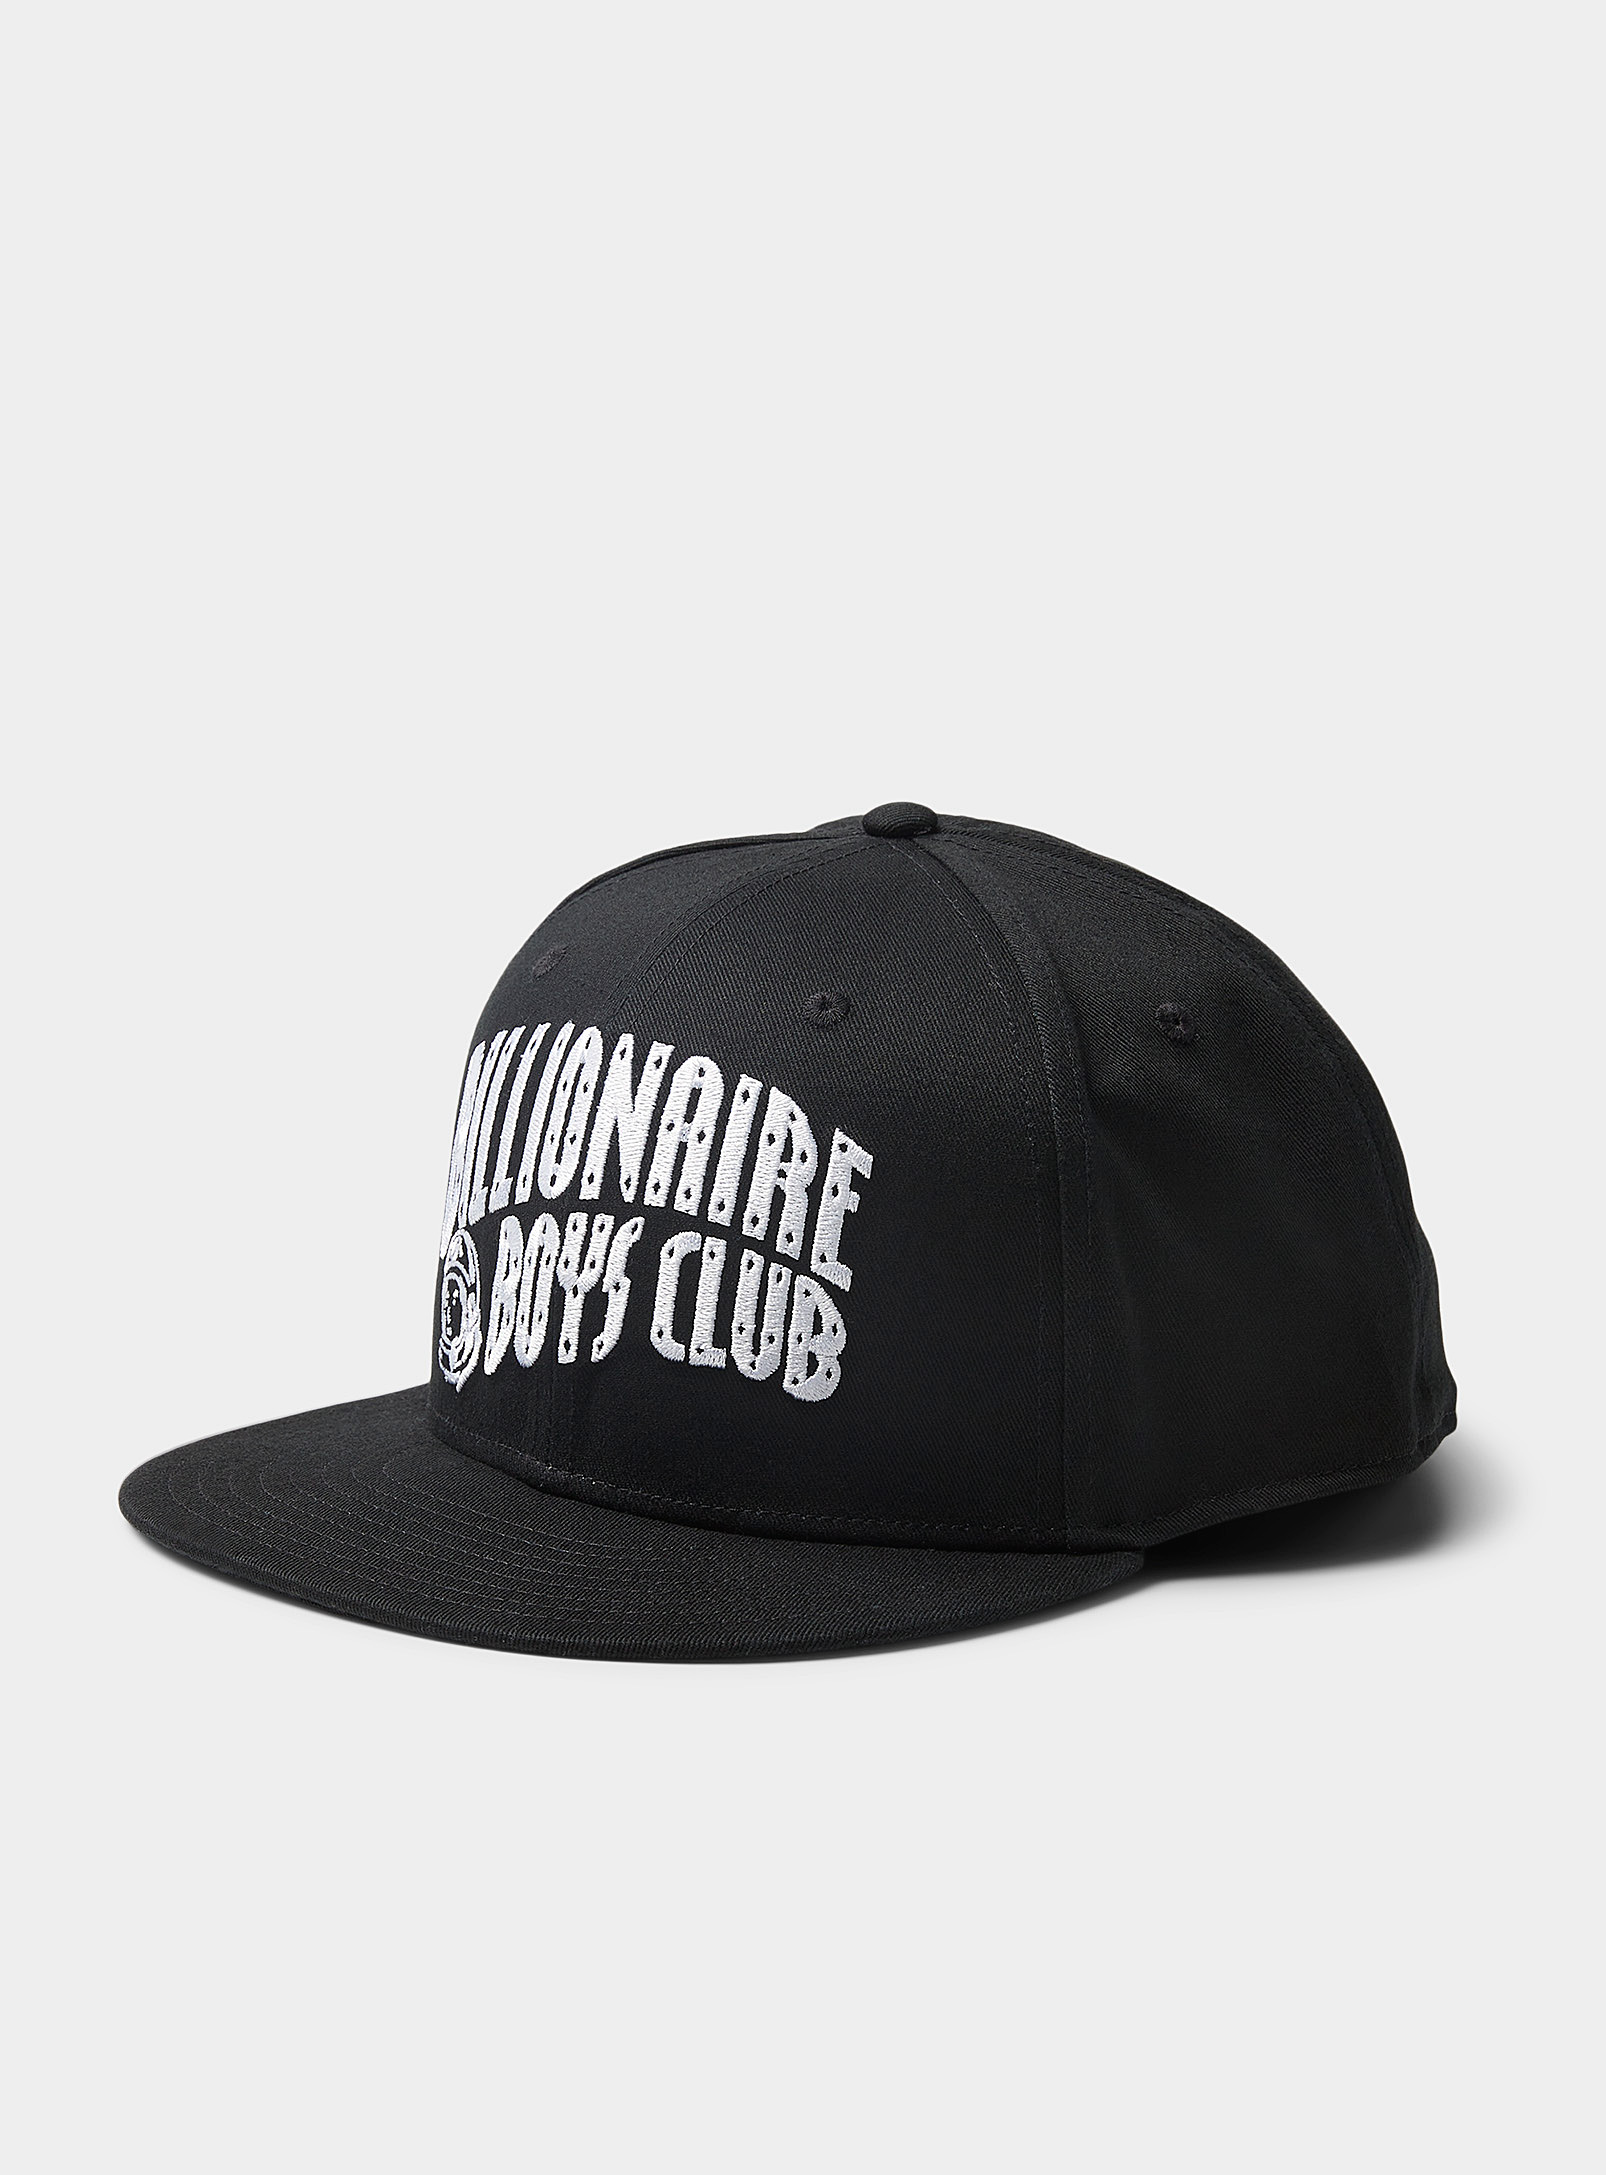 Billionaire Boys Club - Men's Pearls and embroidered logo cap